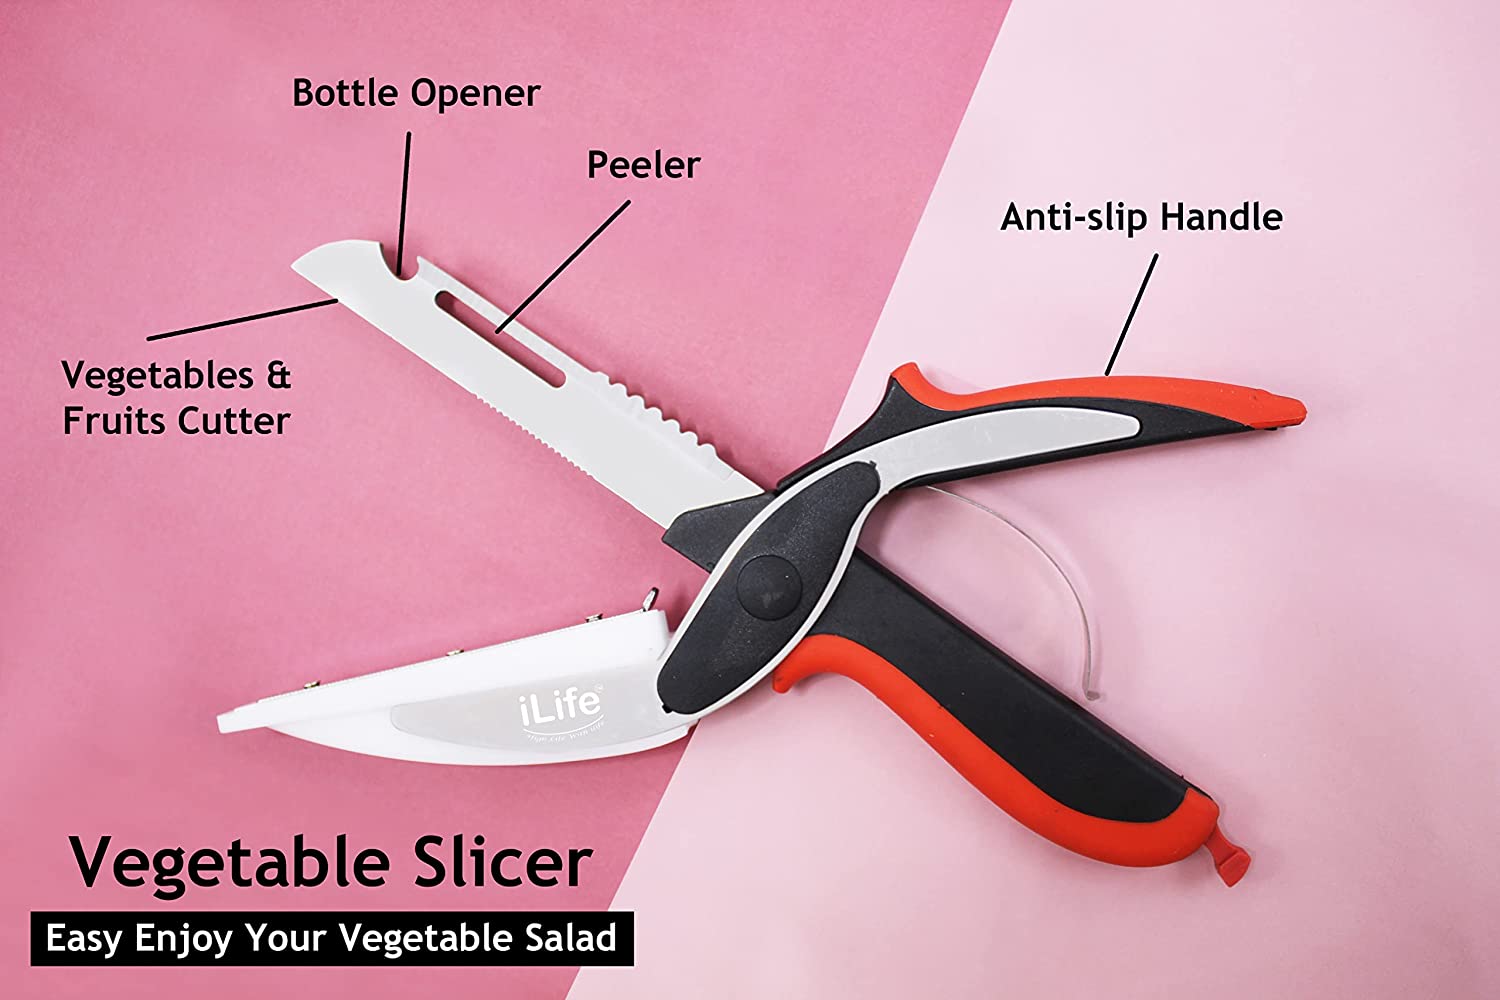 Kitchen Food Cutter Chopper Clever Knife with Board Clever Multipurpose  Scissors